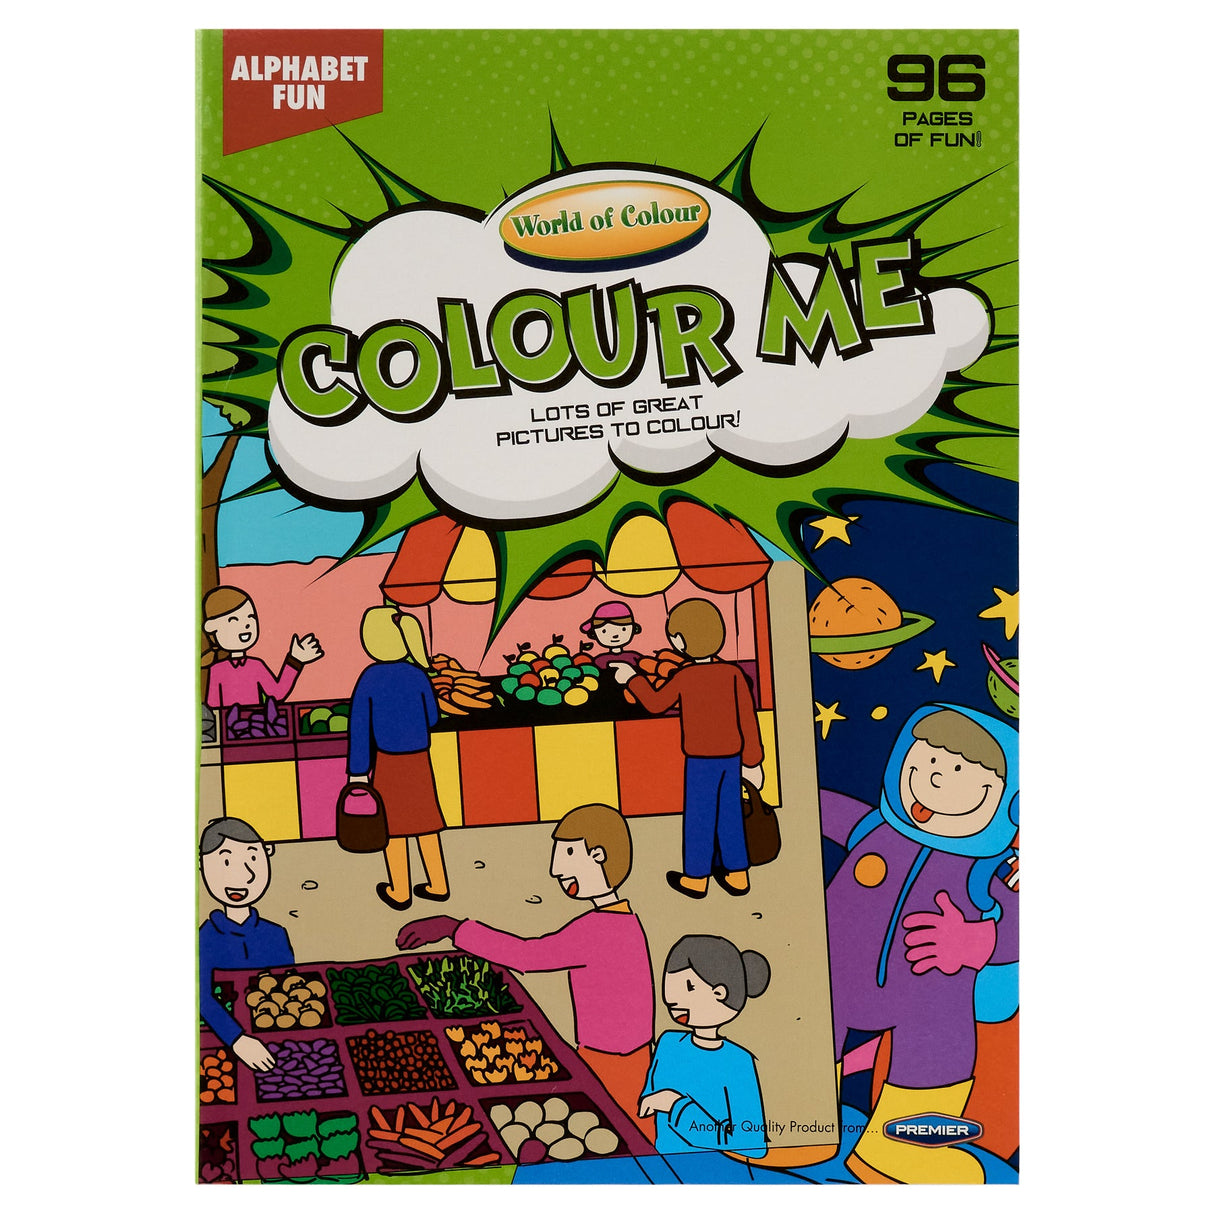 World of Colour A4 Perforated Colour Me Colouring Book - 96 Pages - Alphabet Fun 1-Kids Colouring Books-World of Colour|StationeryShop.co.uk